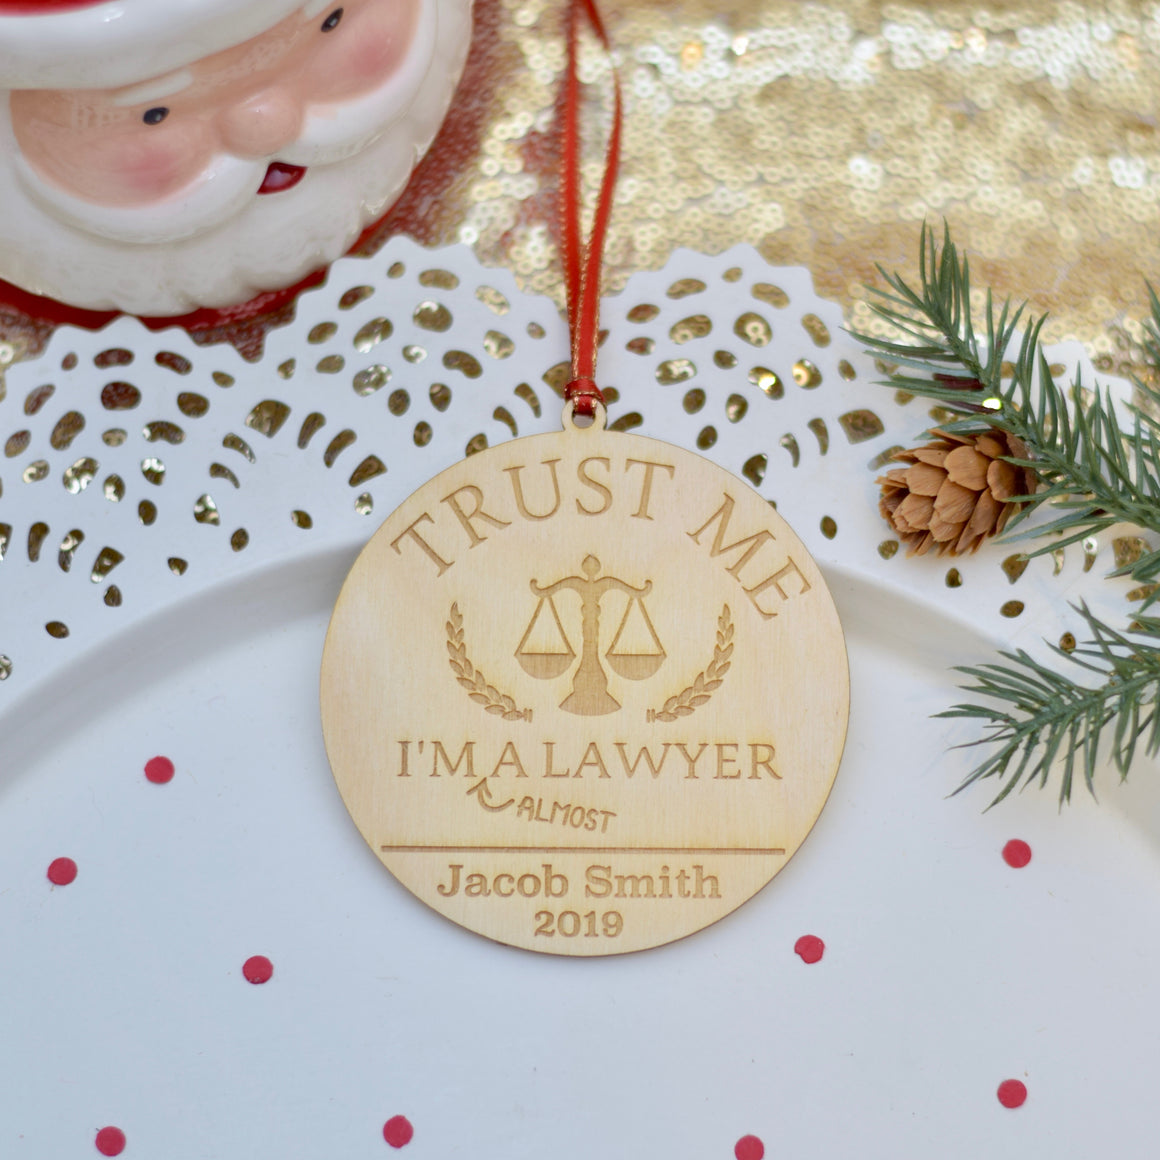 Trust Me I'm a lawyer and scales of justice ornament